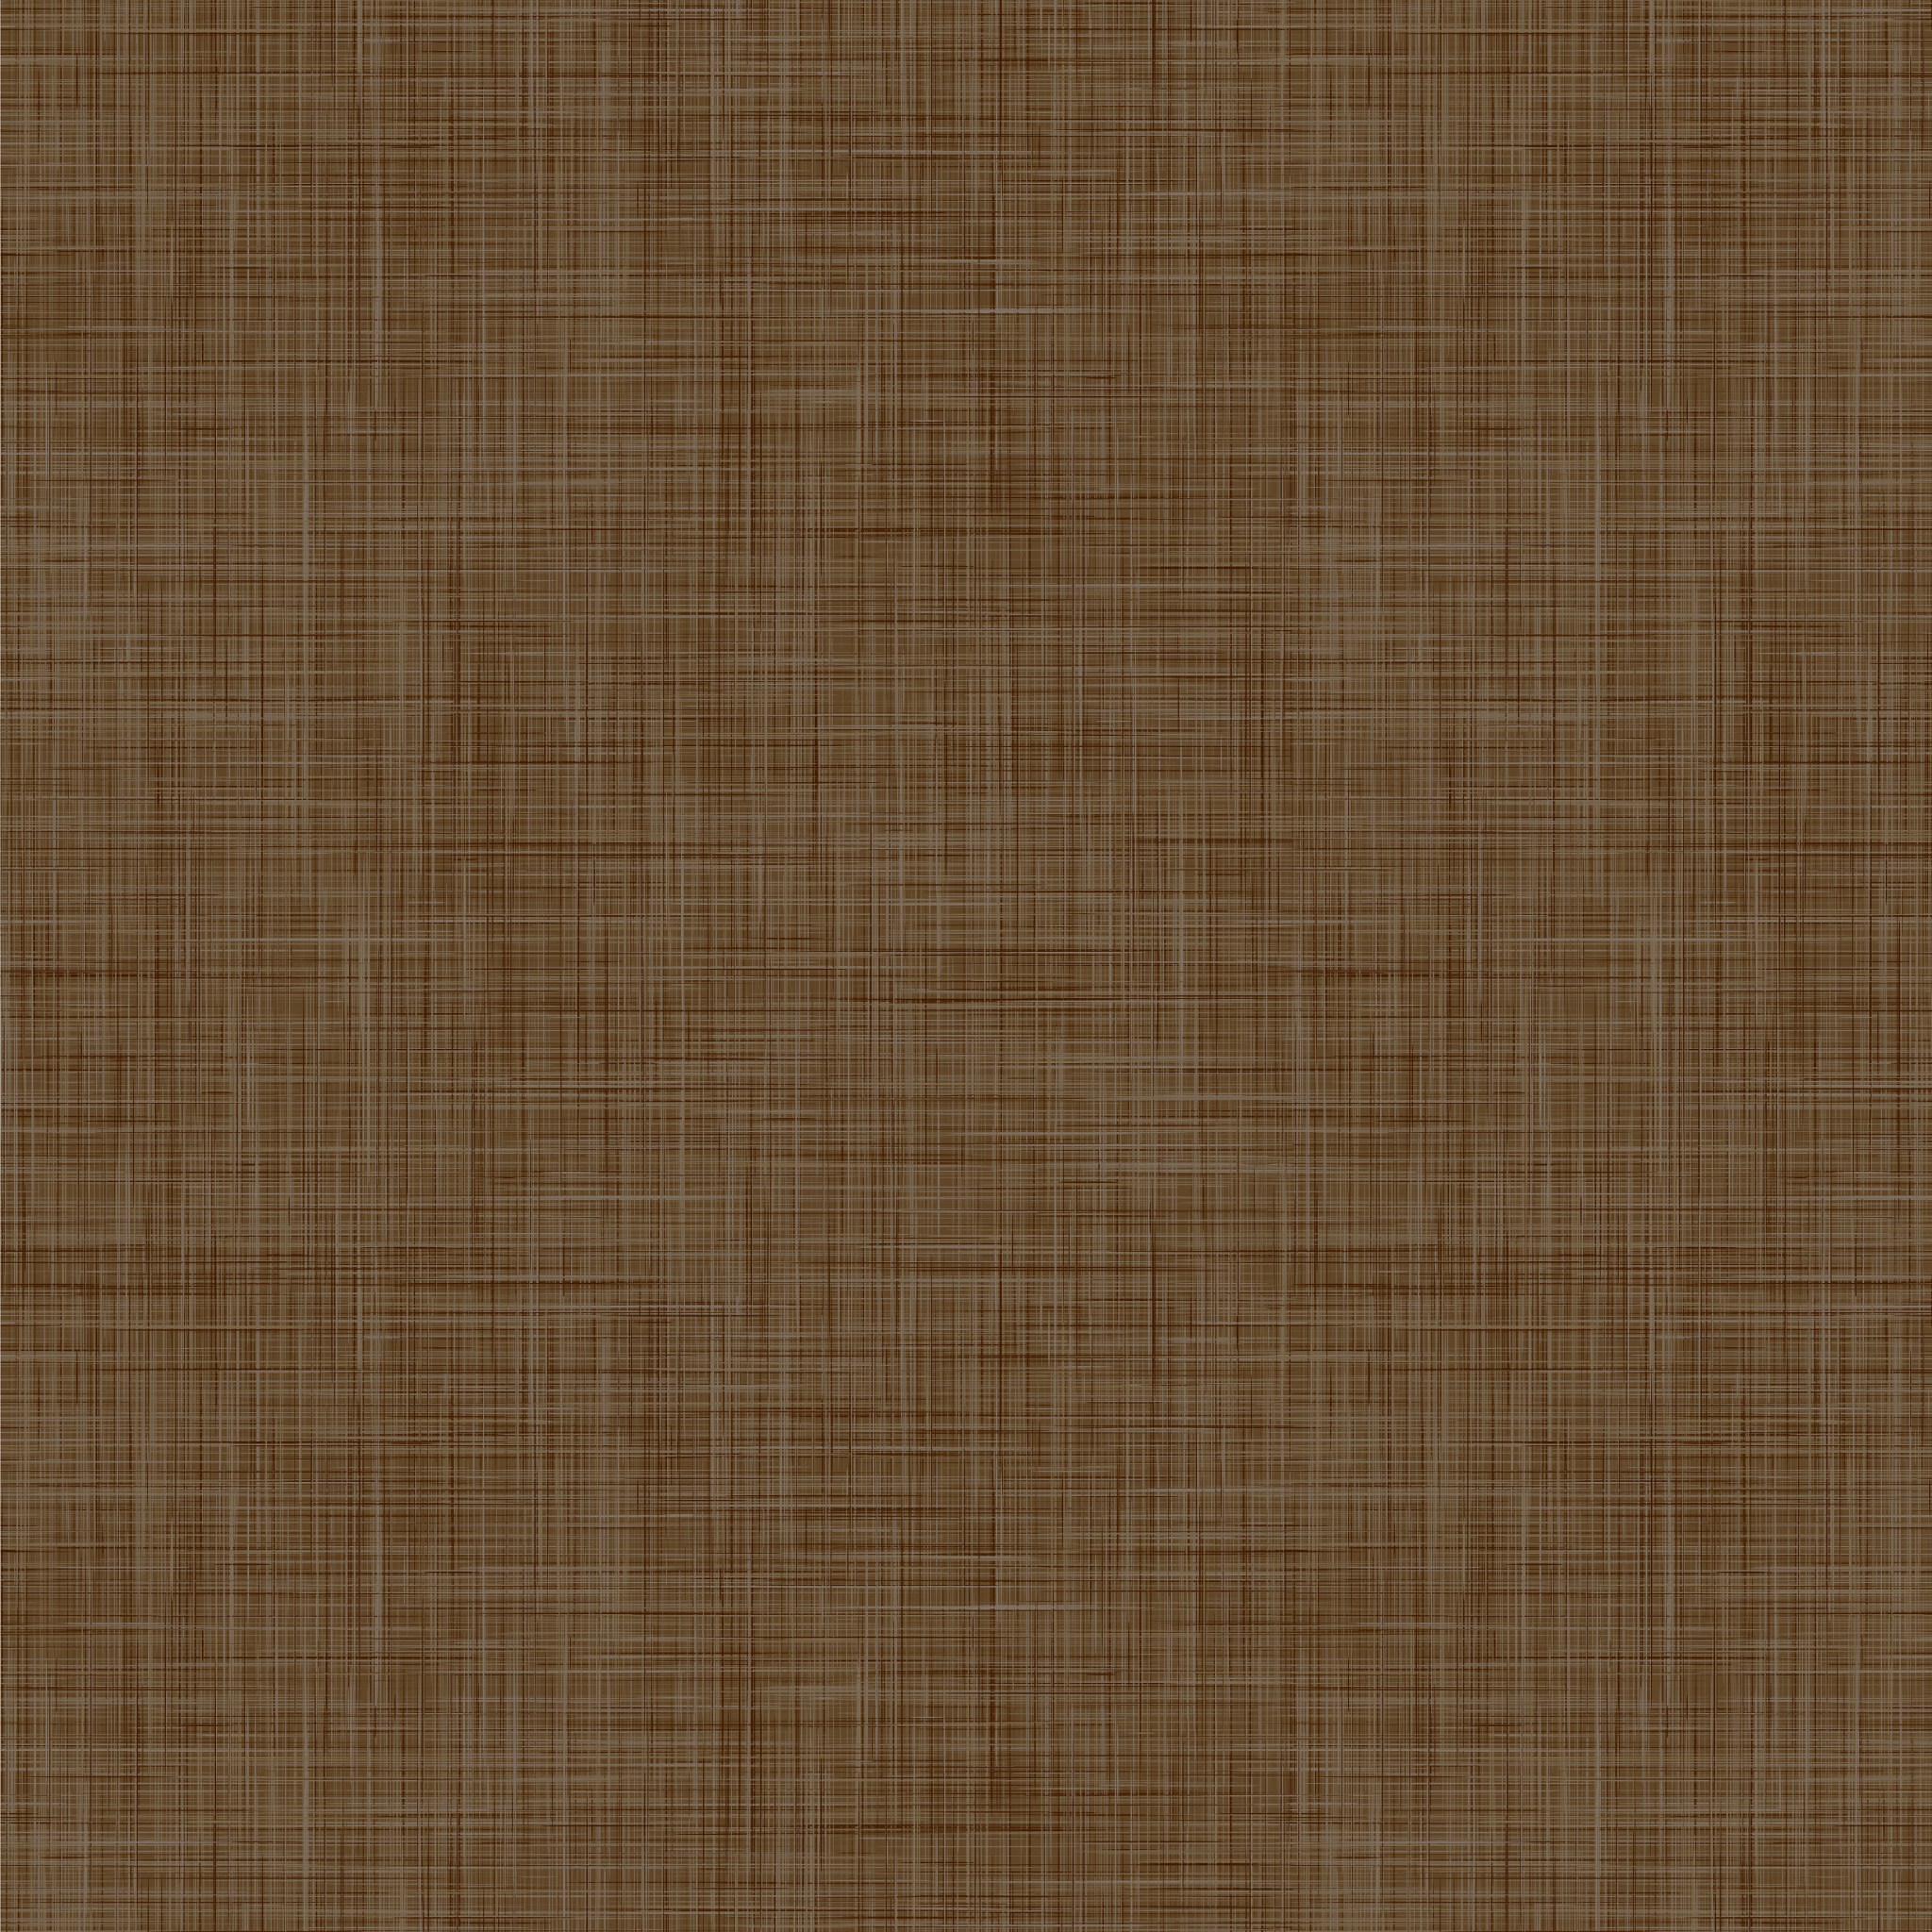 Sample of Brown grasscloth wallpaper for antique style decor, peel and stick grasscloth wallpaper